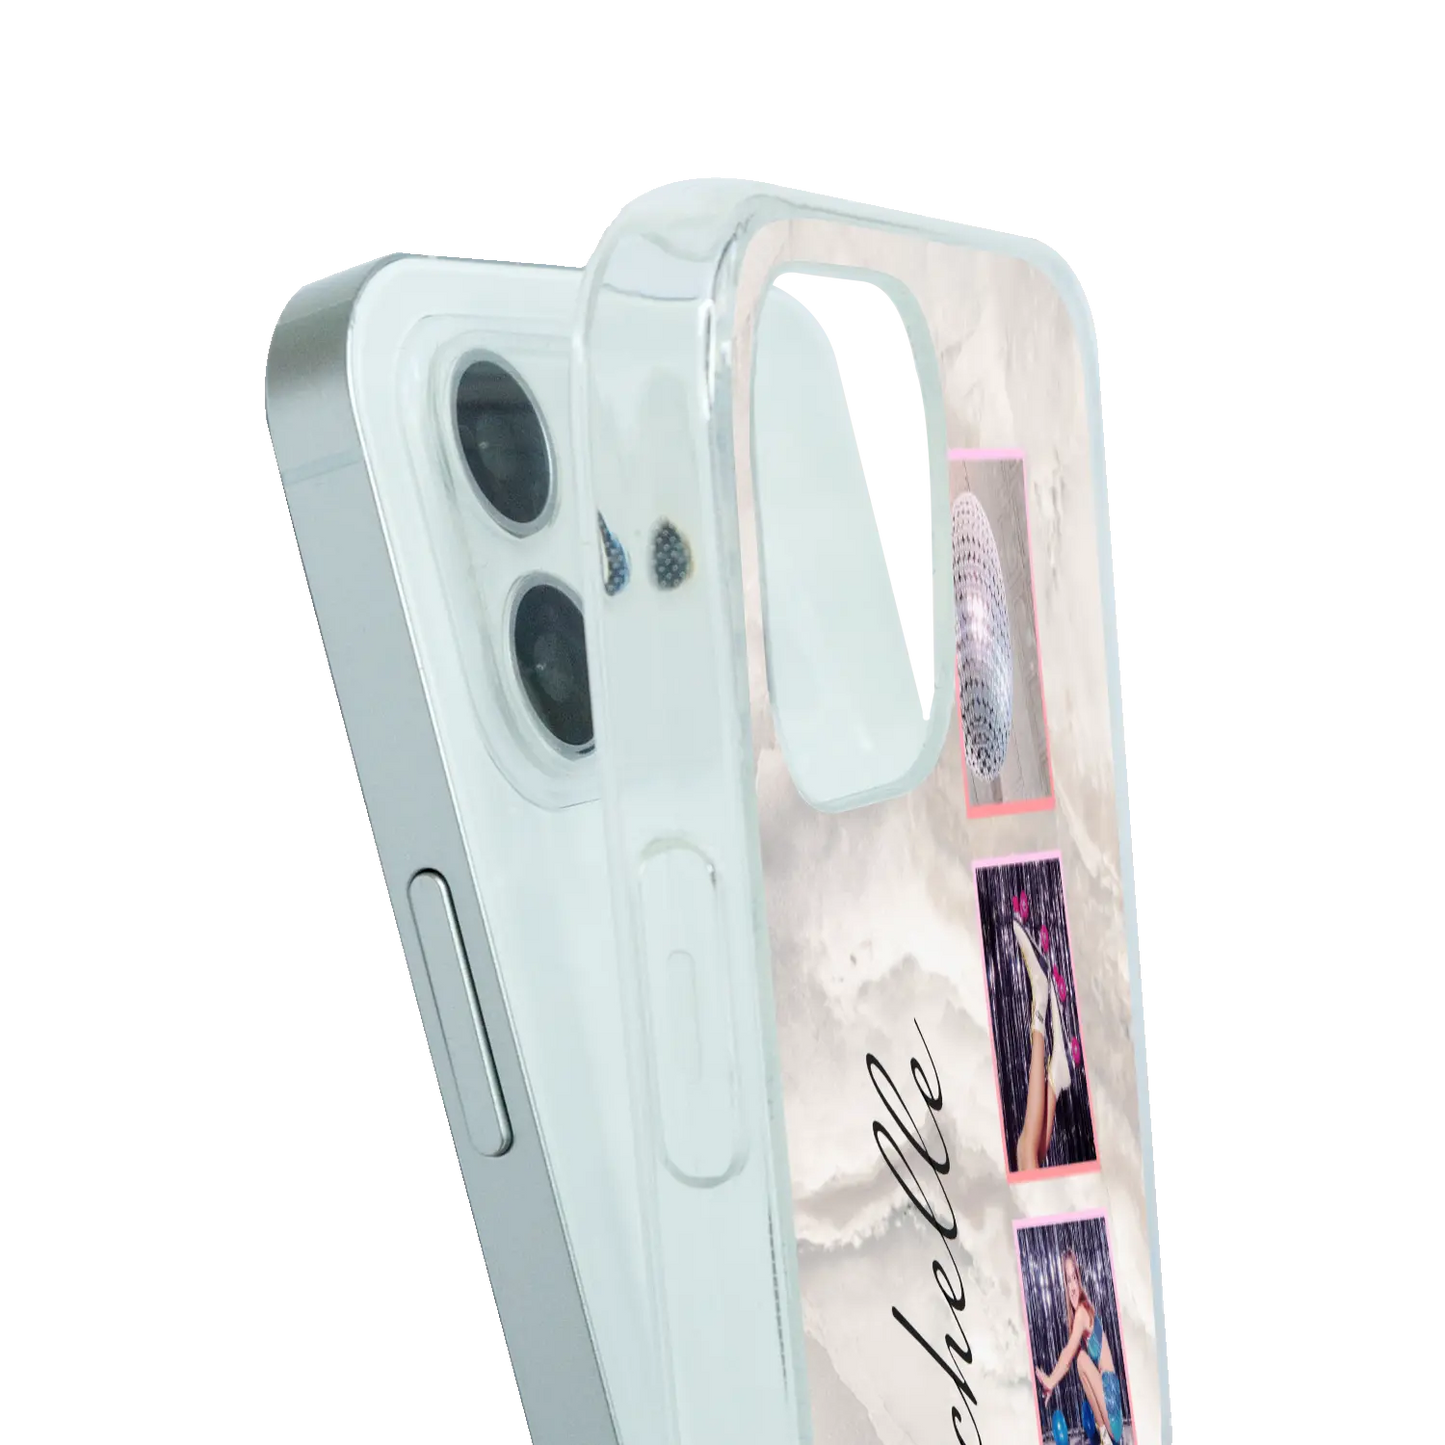 Photo Booth - Personalised iPhone Case